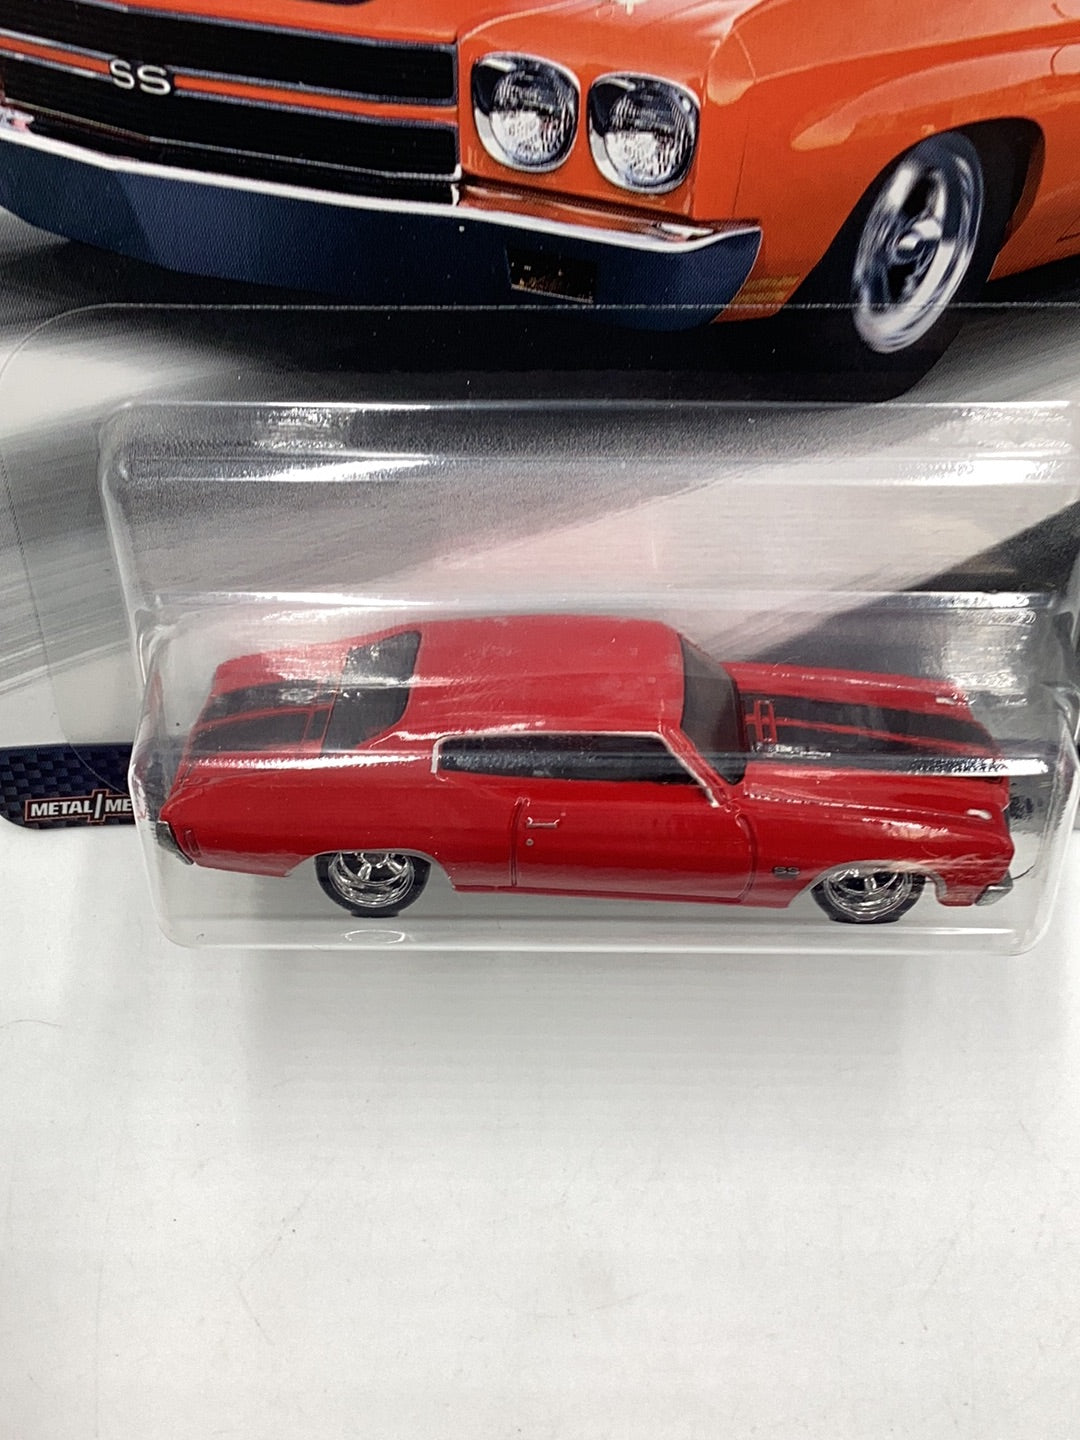 Hot wheels premium fast and furious 1/4 mile Muscle 1970 Chevrolet Chevelle SS 246H